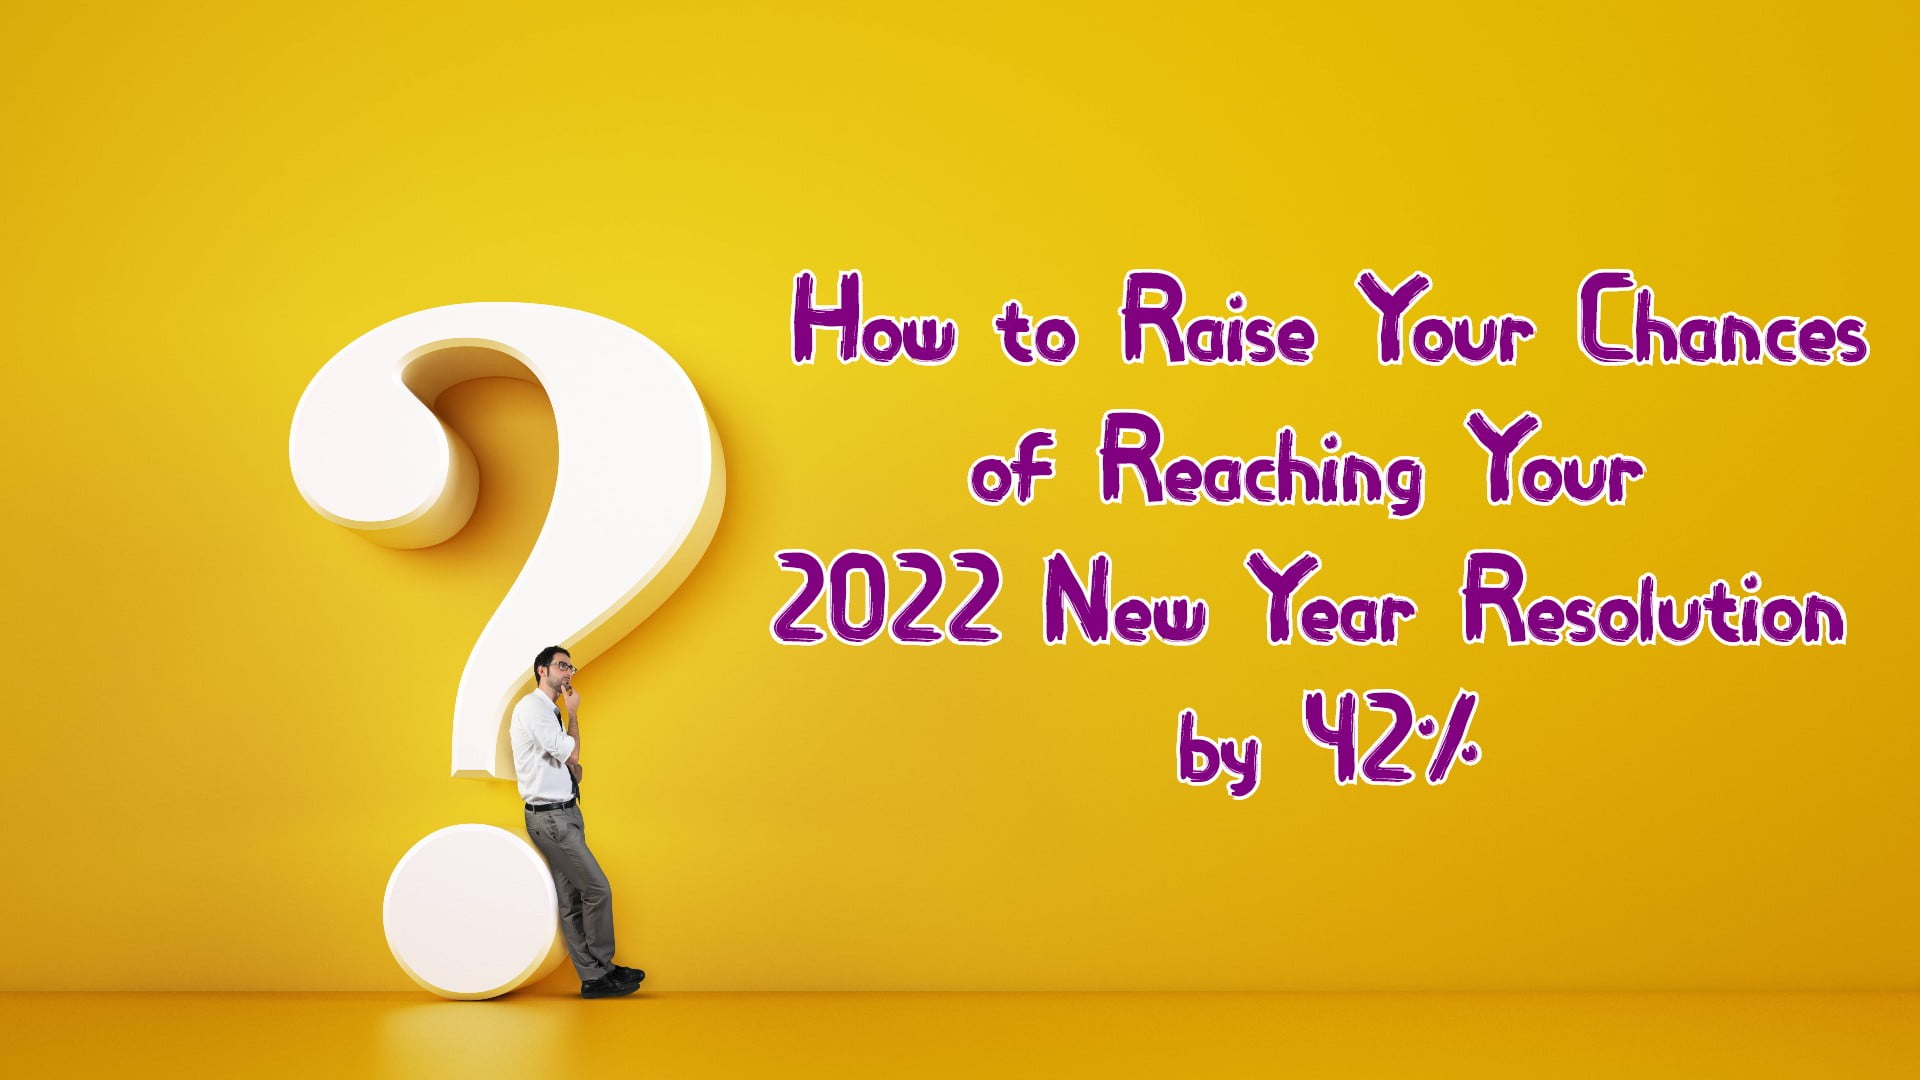 How to Raise Your Chances of Reaching Your 2022 New Year Resolution by 42%